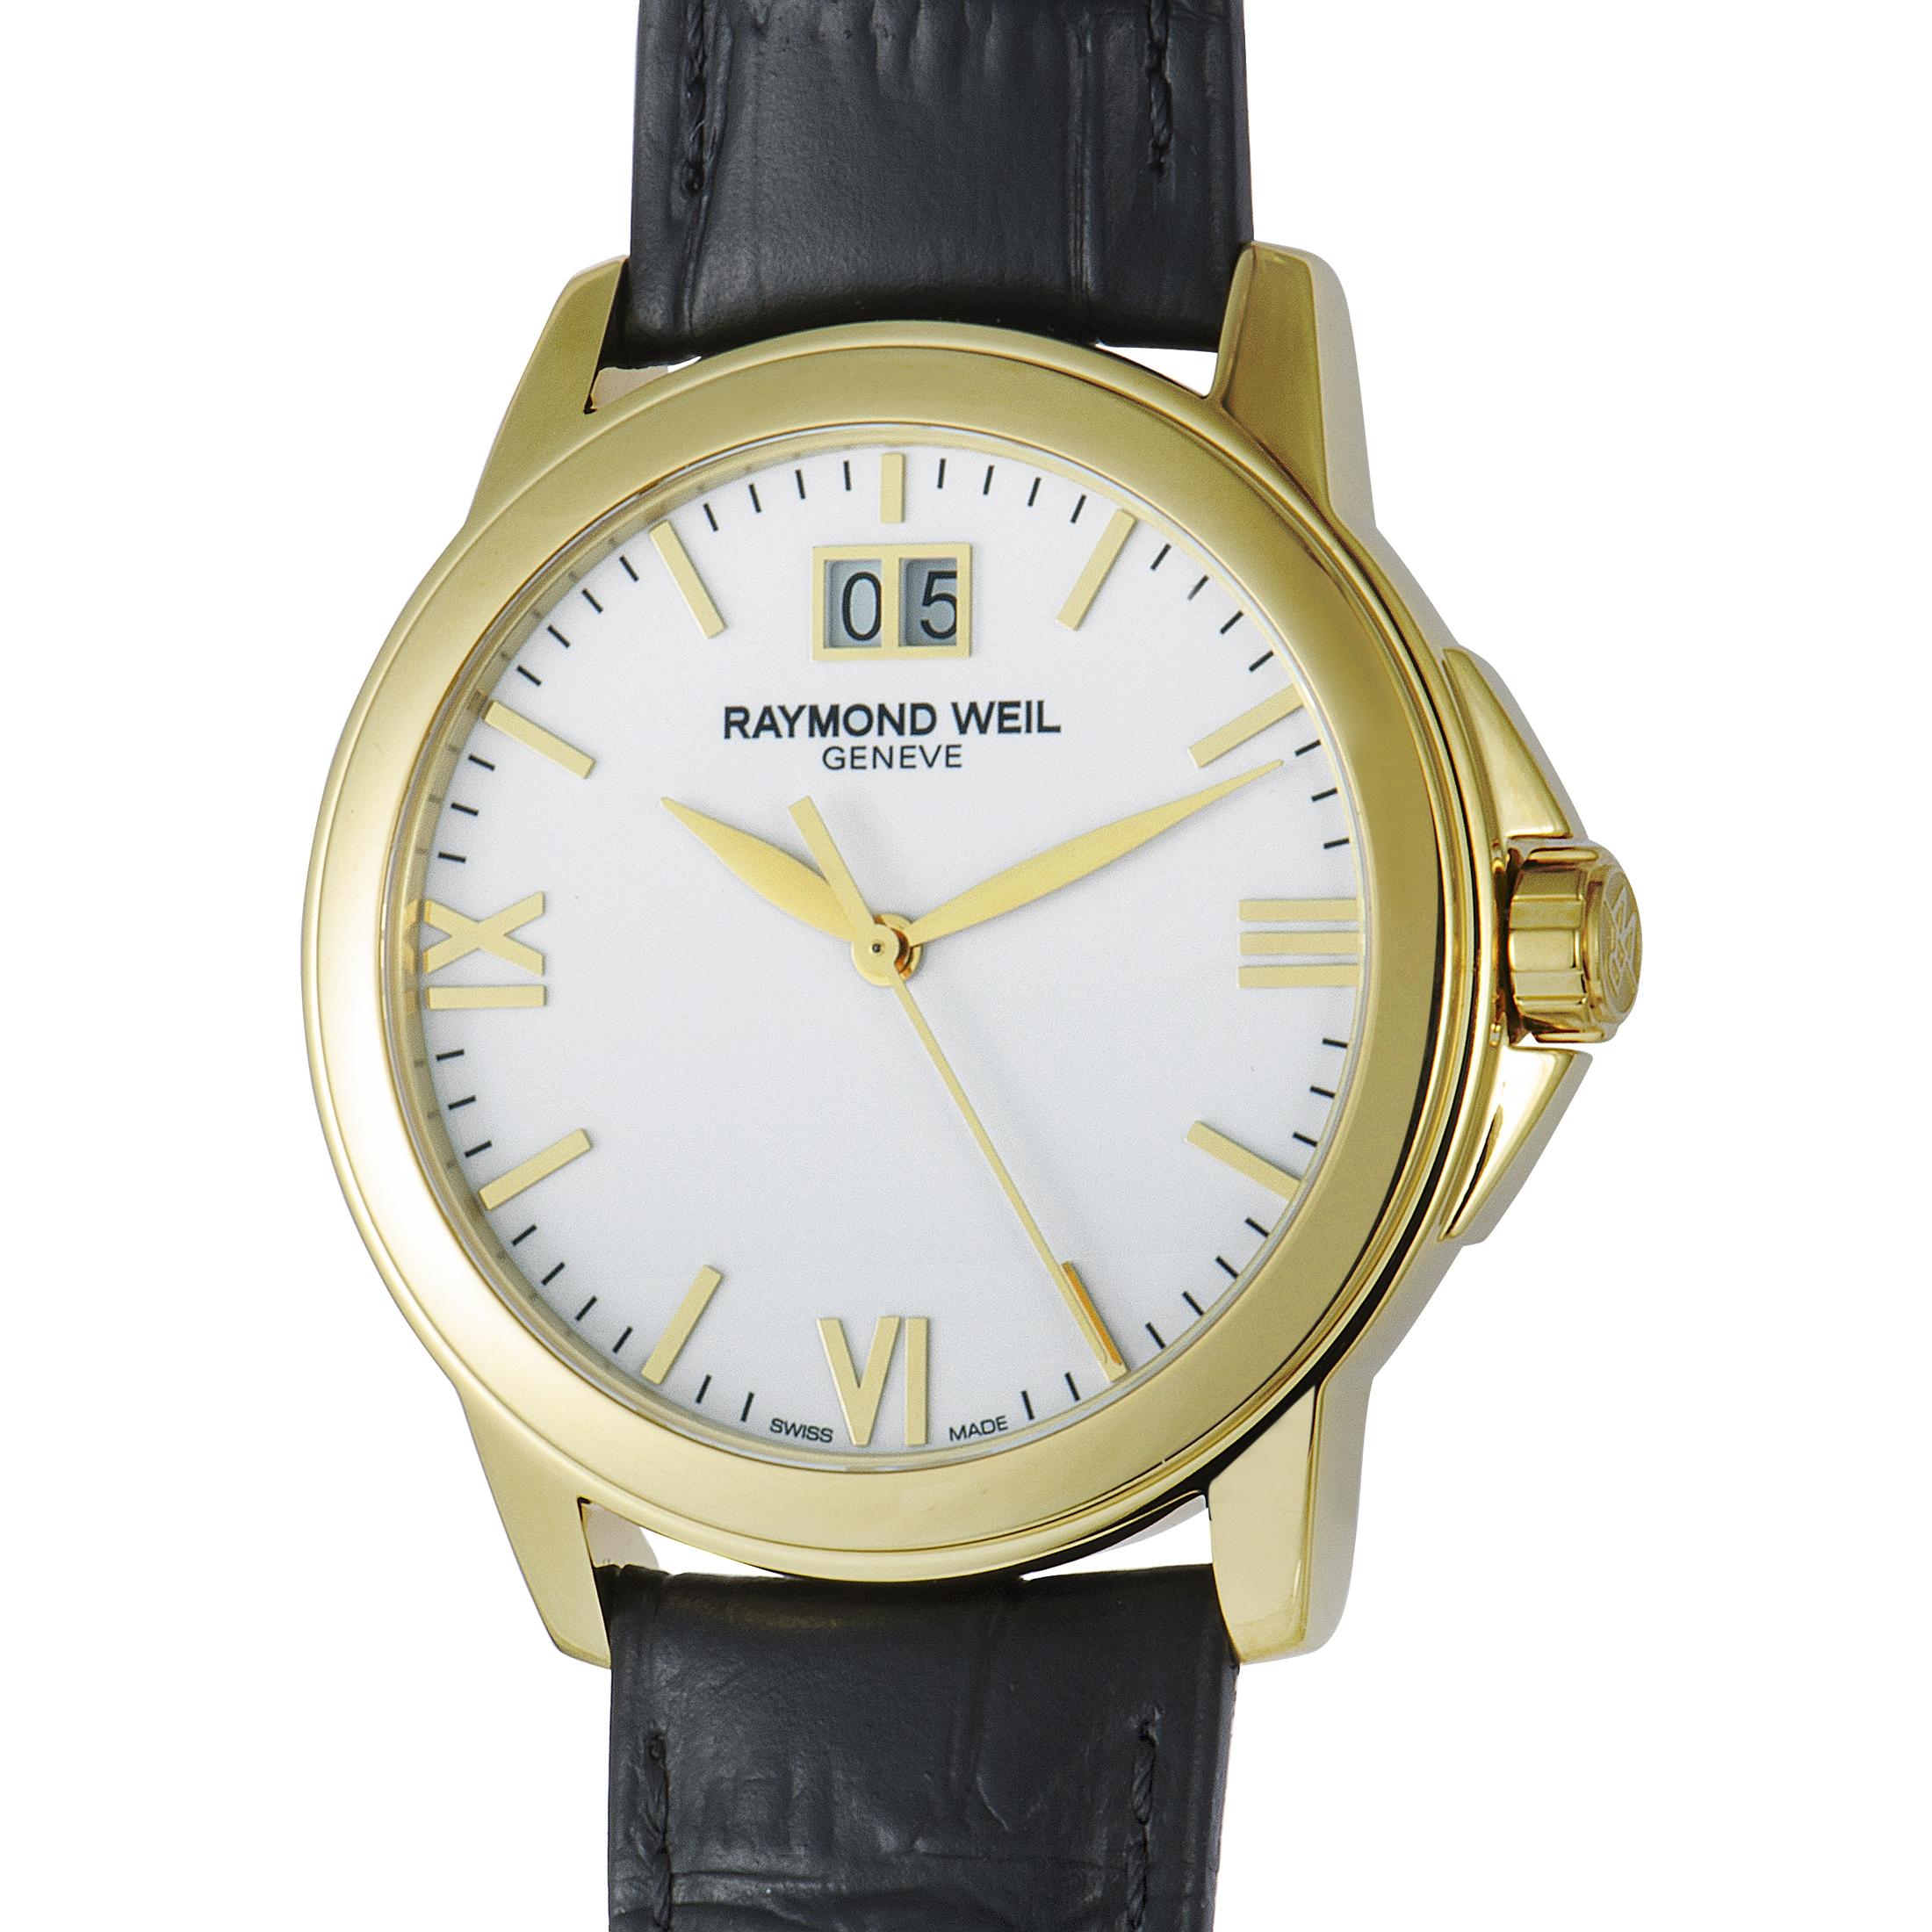 Adding an exceptionally subtle and remarkably intriguing modern twist to a design that exudes tasteful elegance and classic refinement, Raymond Weil created a glorious marriage of traditional watchmaking and contemporary style in this slick